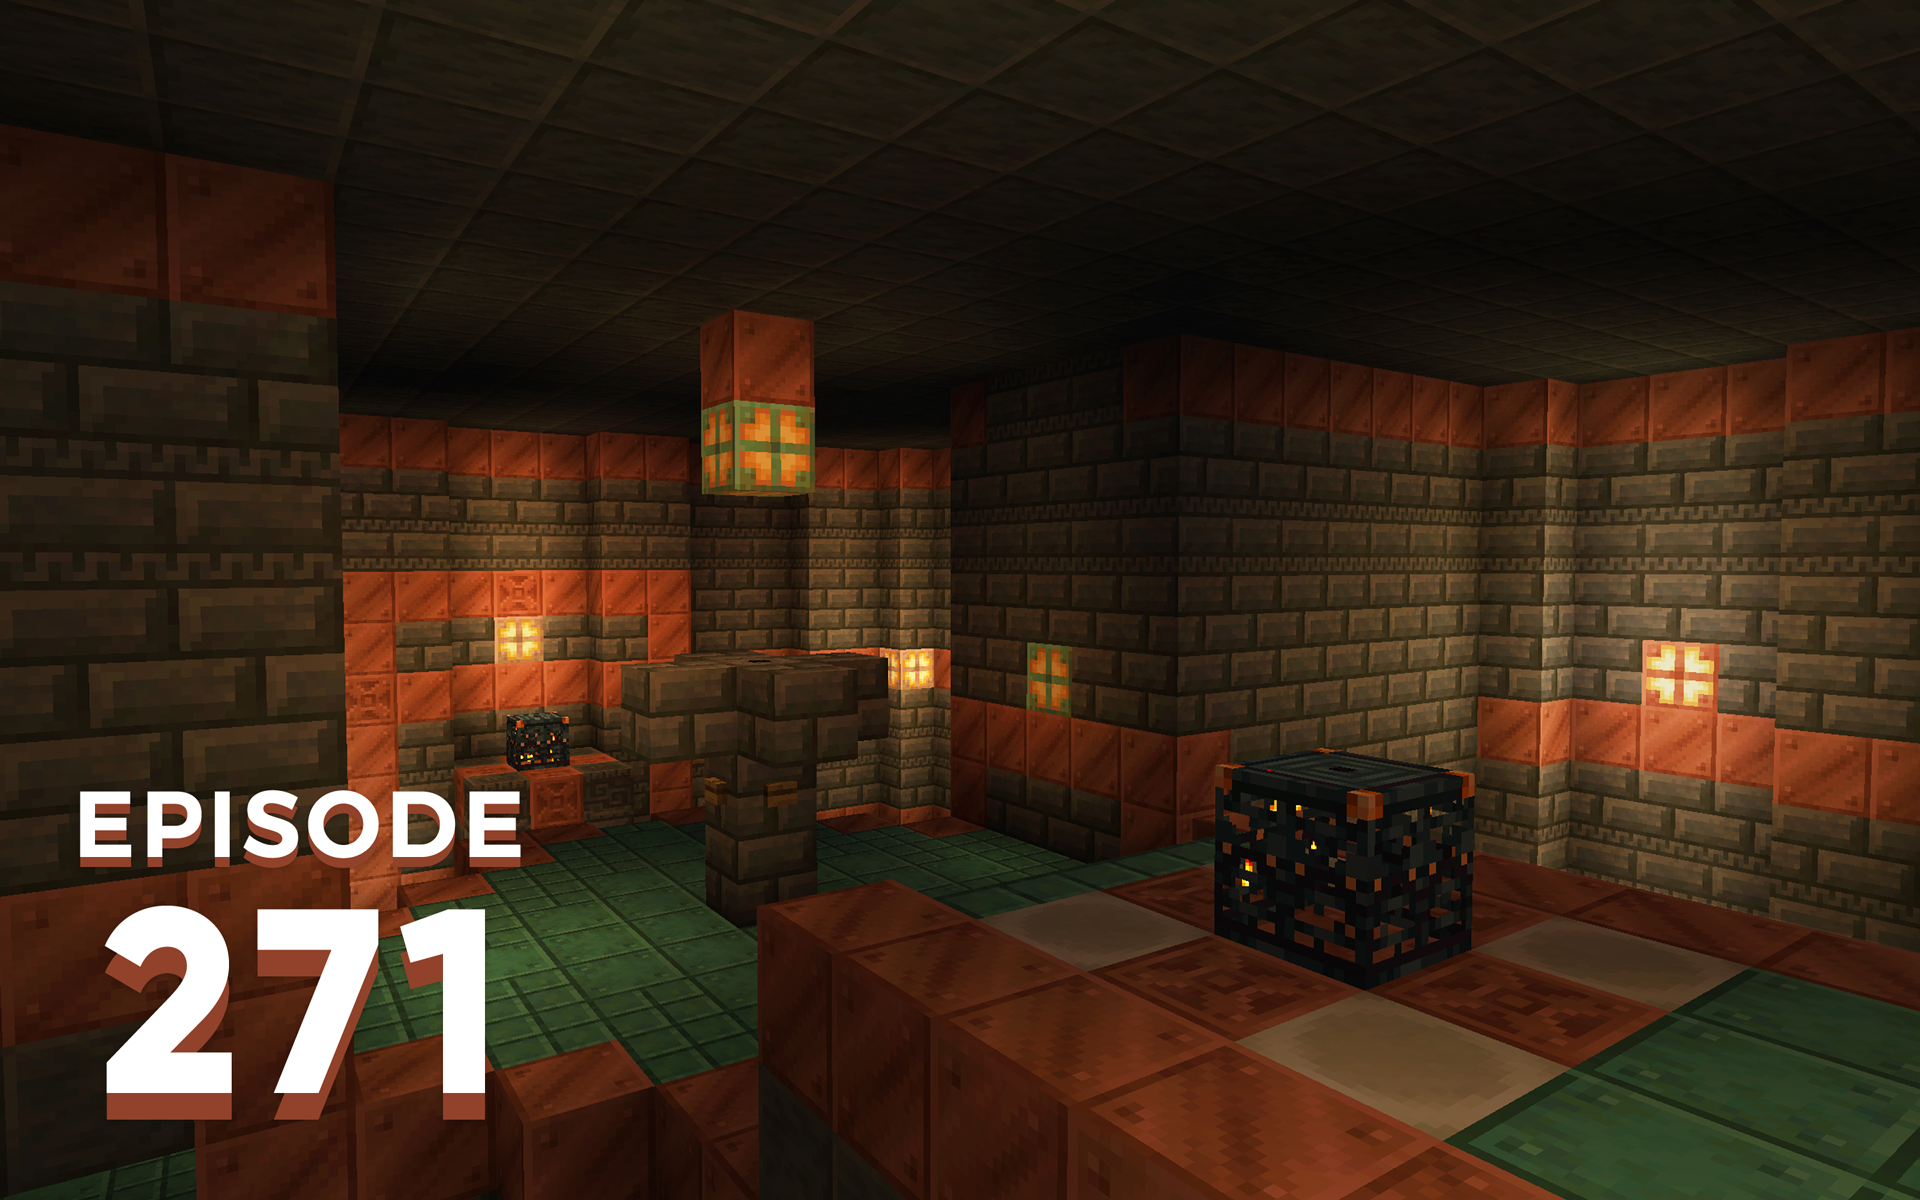 The Spawn Chunks 271: The Depth Of Trial Chambers